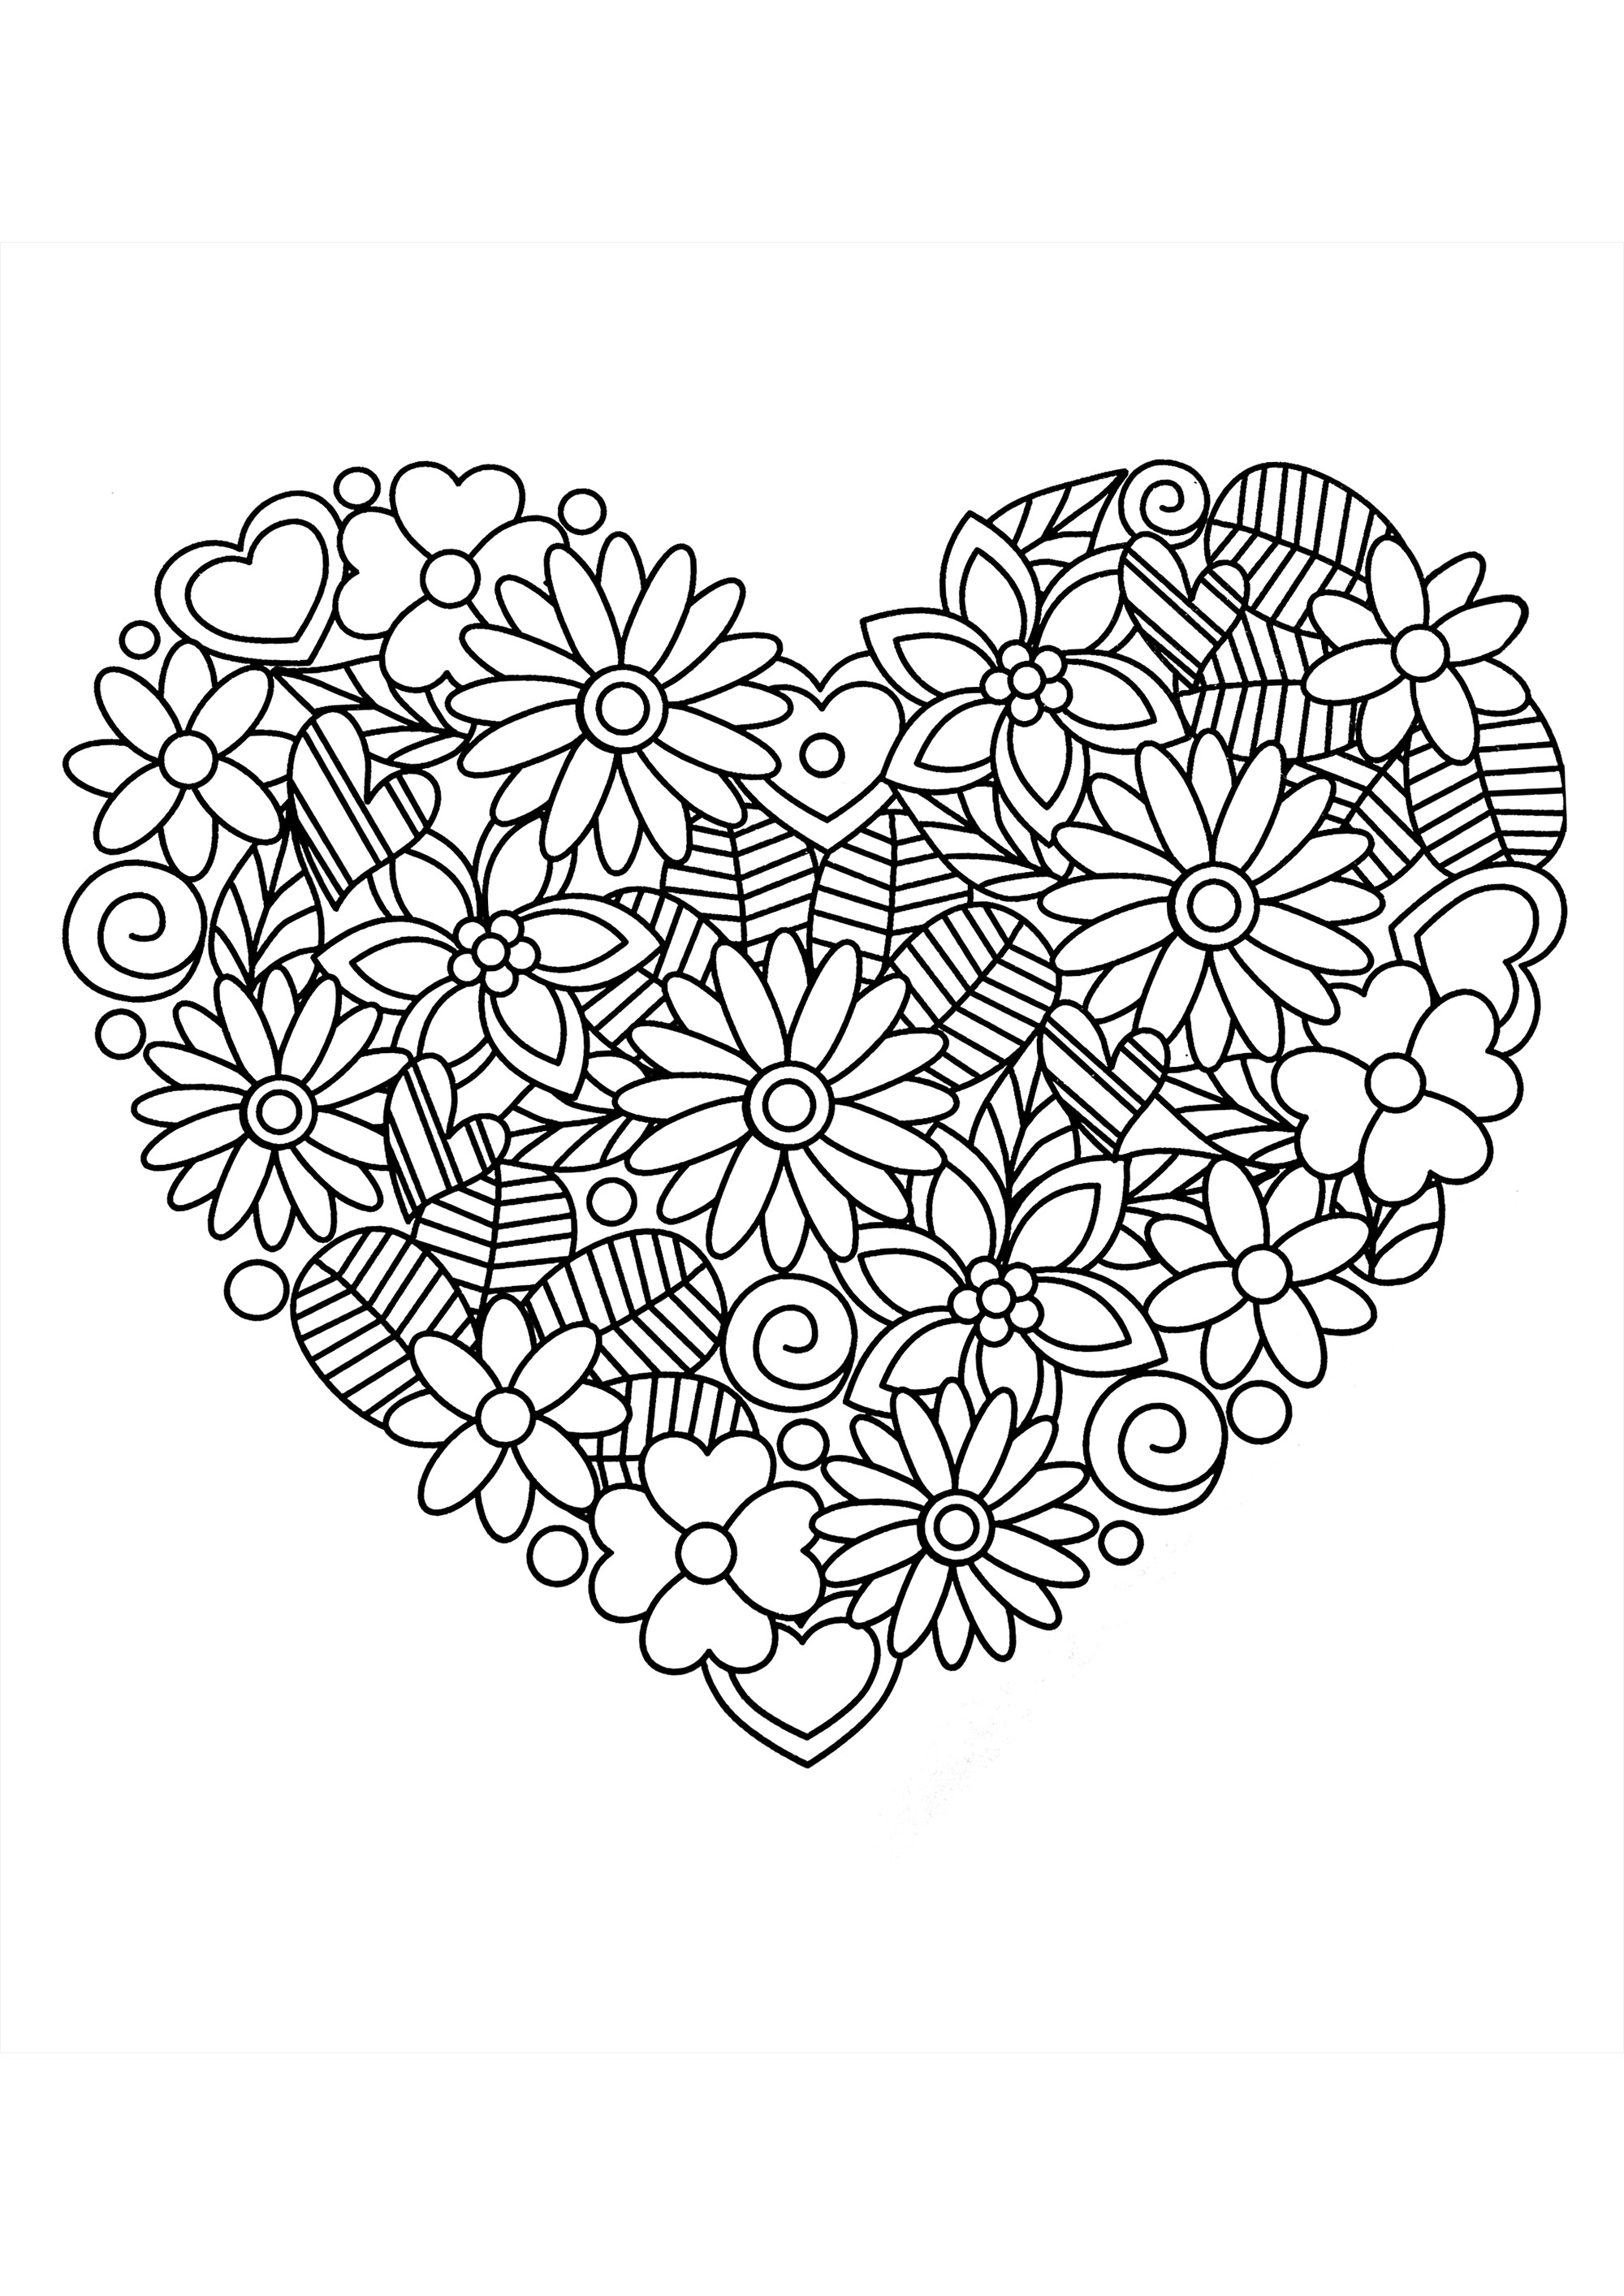 Pretty heart of flowers and leaves. This pretty coloring page features flowers and leaves arranged in harmony to create a beautiful heart.